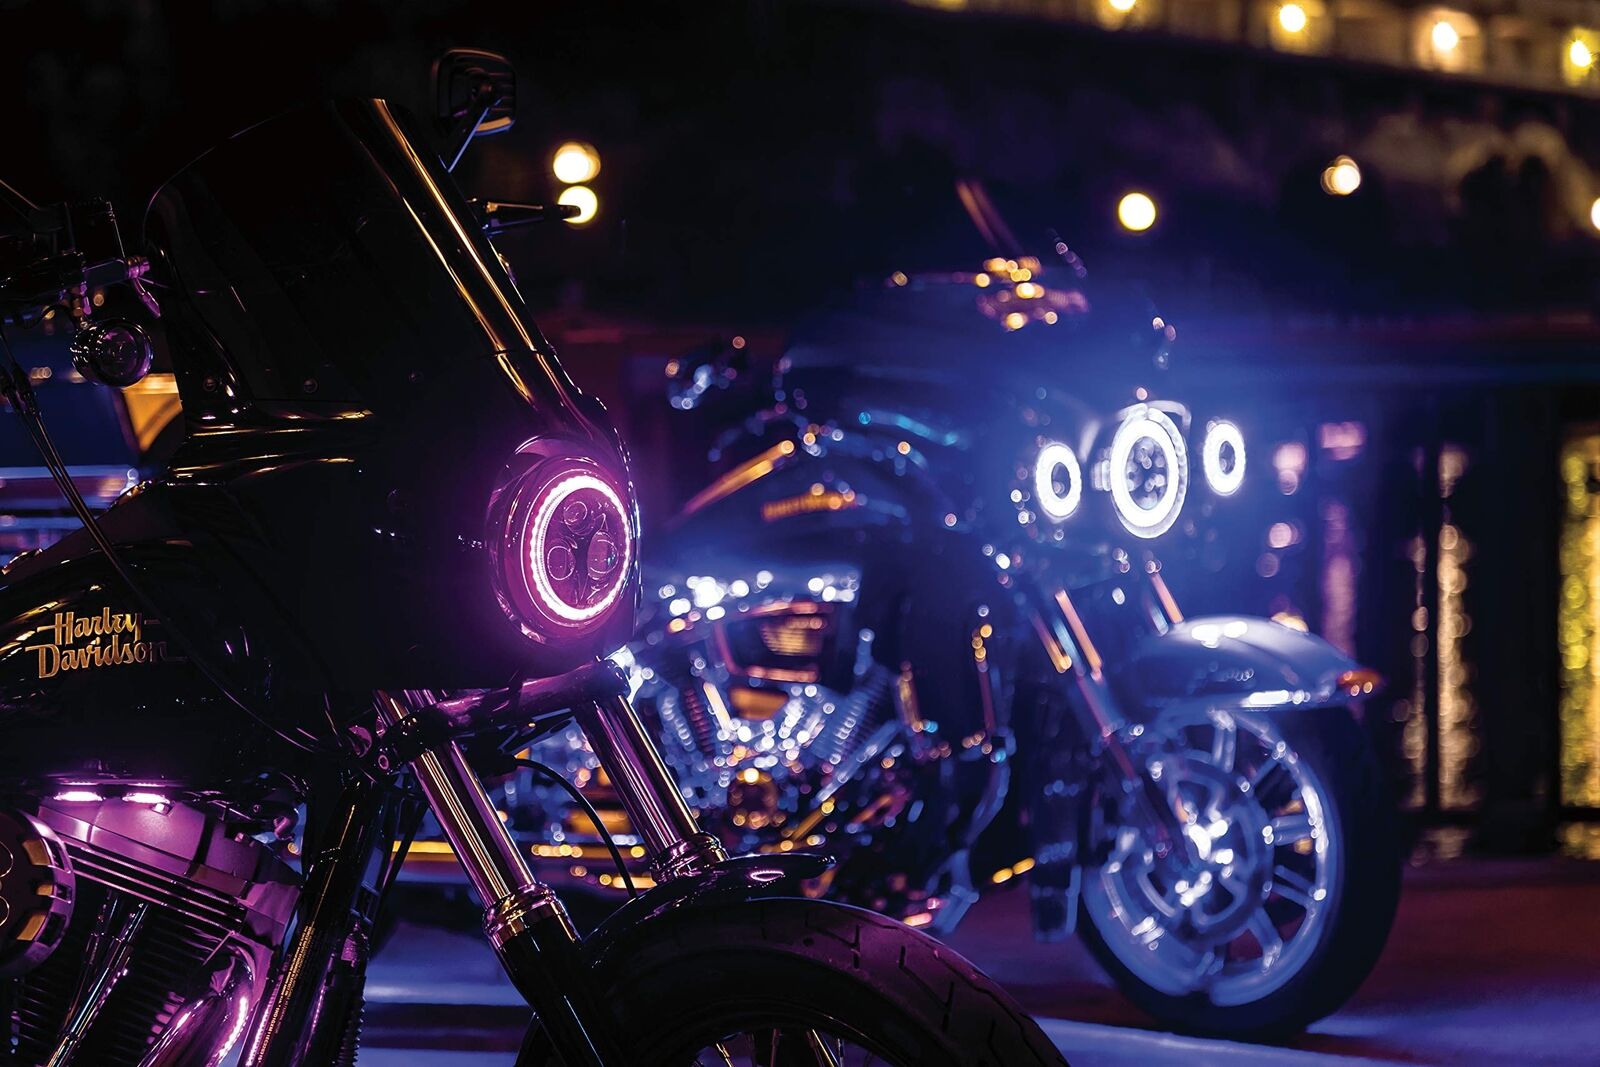 Kuryakyn 2473 Orbit Prism+ 5 3/4" LED Headlamp Headlight with Bluetooth Controlled Multi-Color Light Halo Ring for Harley-Davidson, Indian, Victory Motorcycles - image 3 of 4